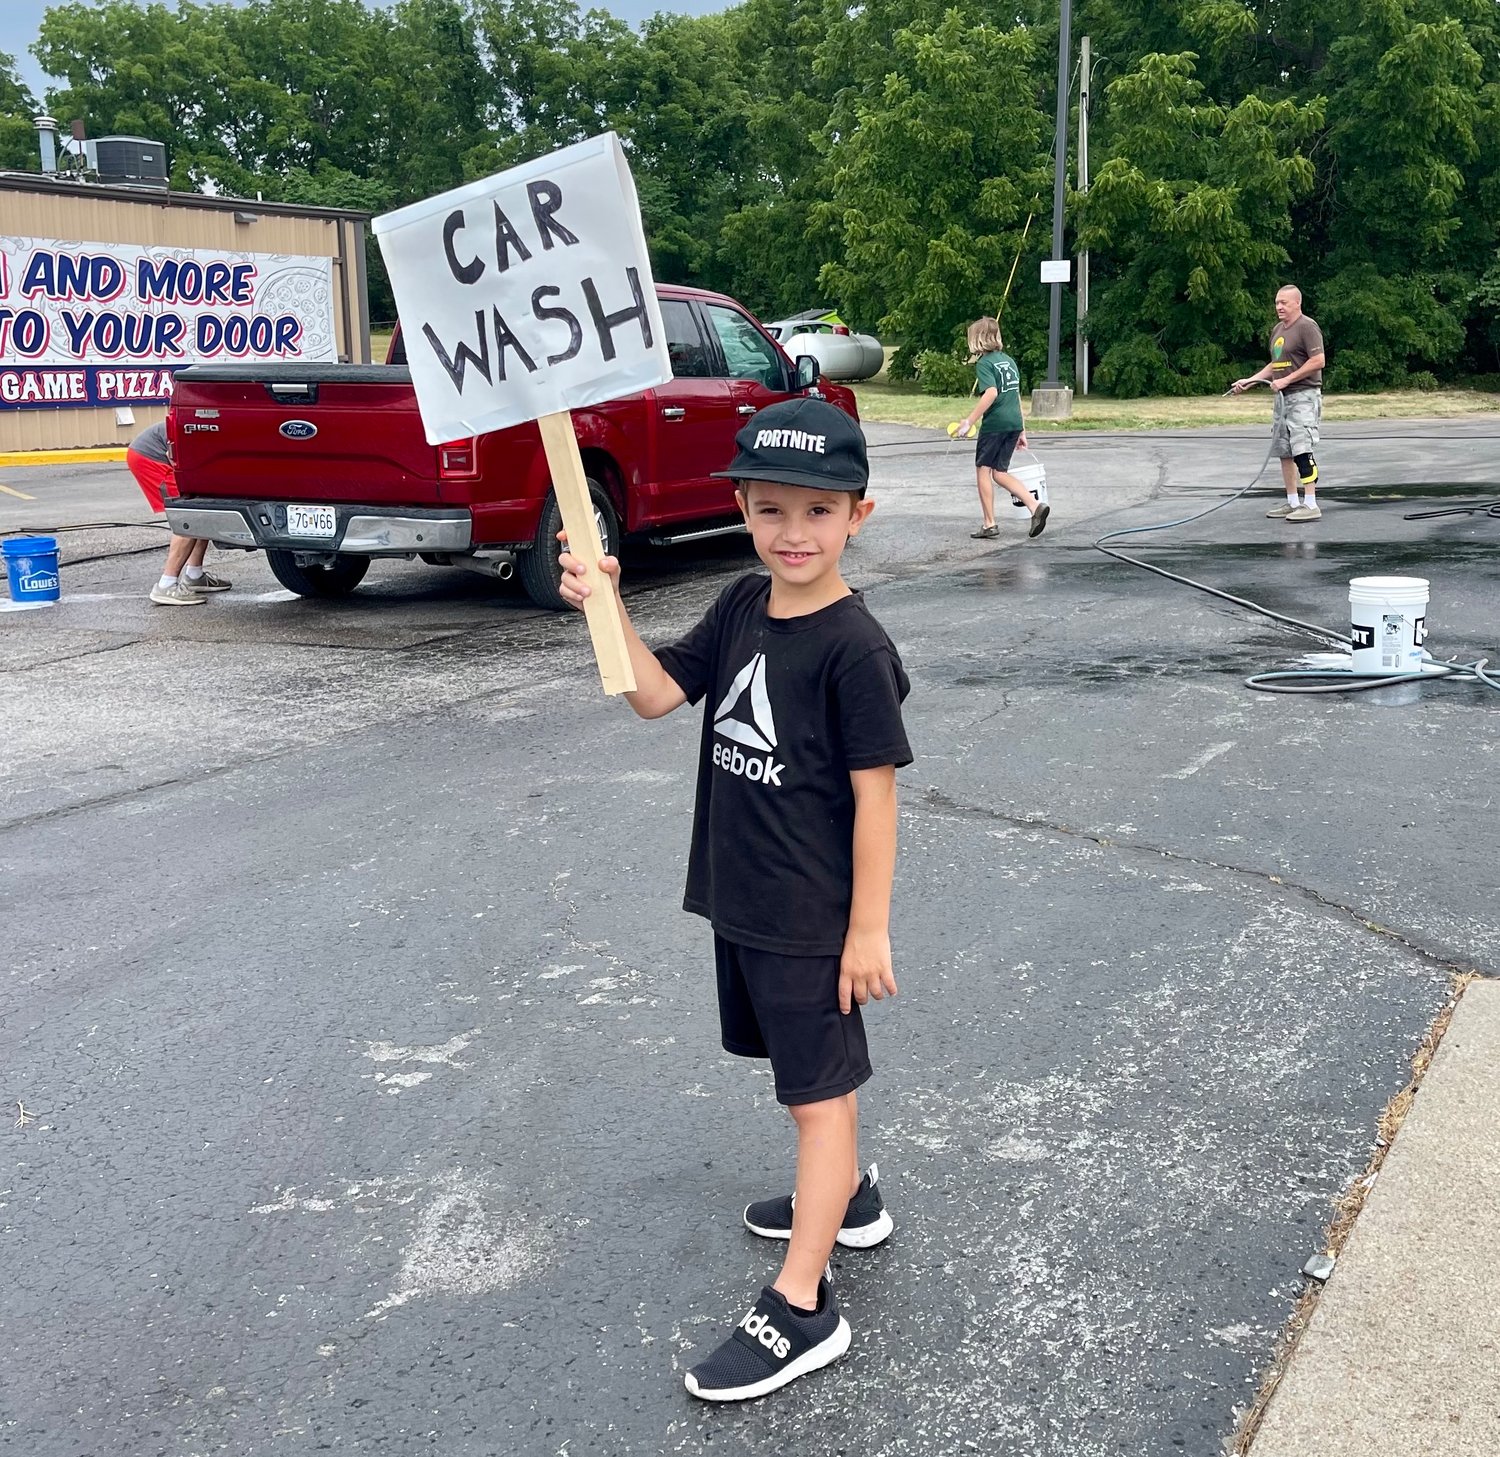 The Boy Scouts held a car wash to raise funds for the gazebo project. Donations were collected to go towards the gazebo and picnic table project.